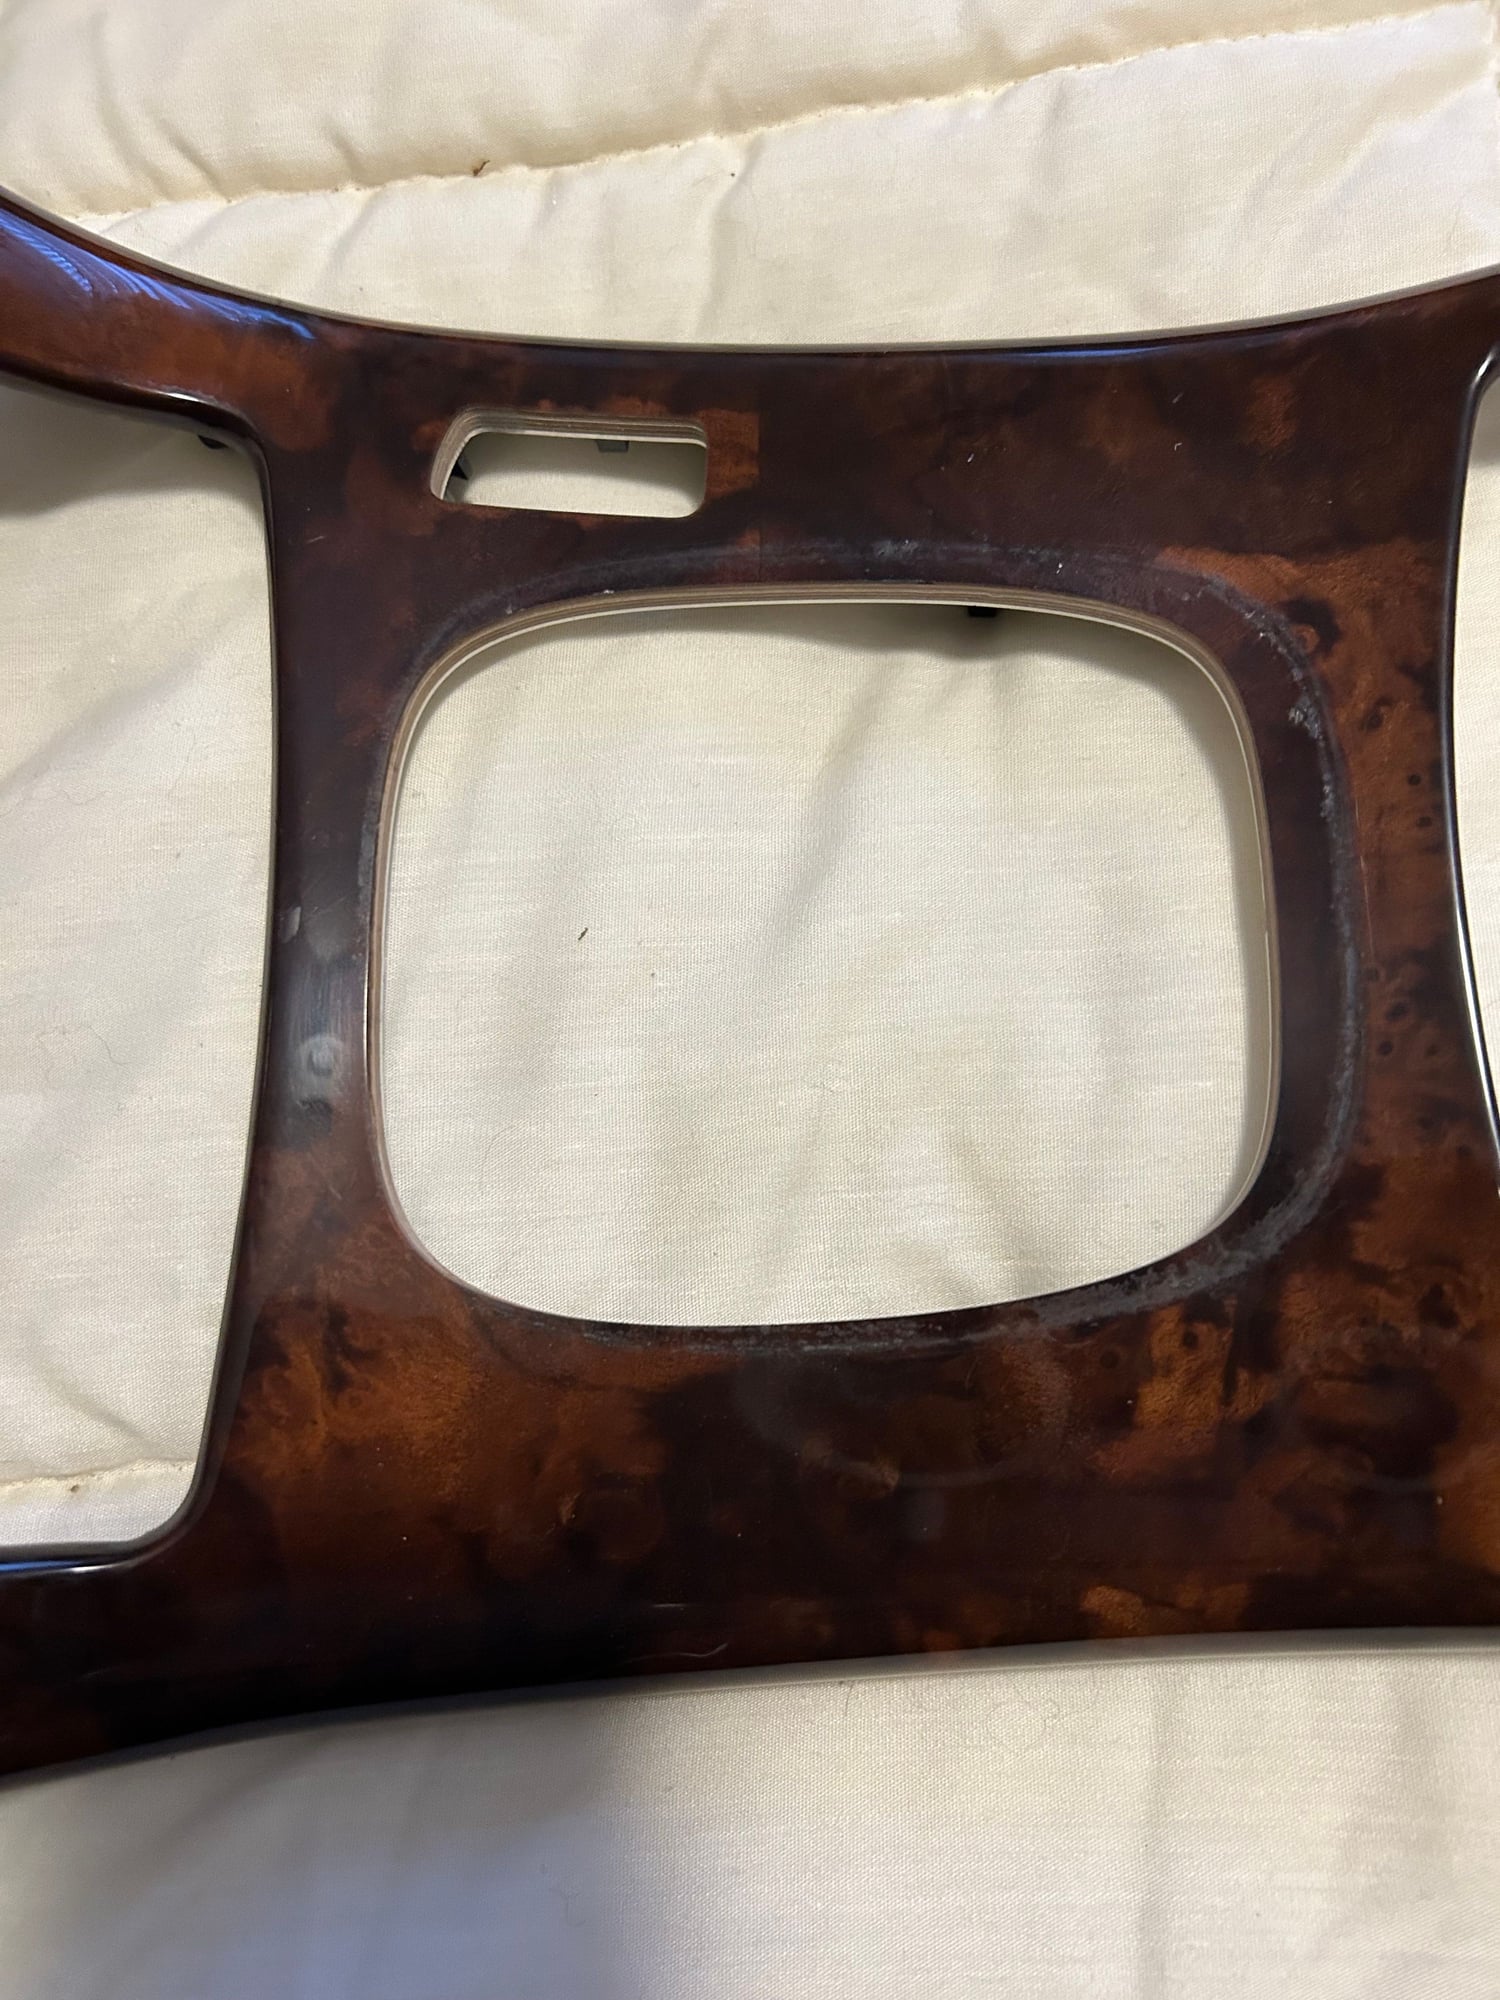 Interior/Upholstery - 00-06 Mercedes CL Class W215 Center Console Wood Trim 2156805639 - Used - 2000 to 2005 Mercedes-Benz CL500 - Canton, MI 48187, United States